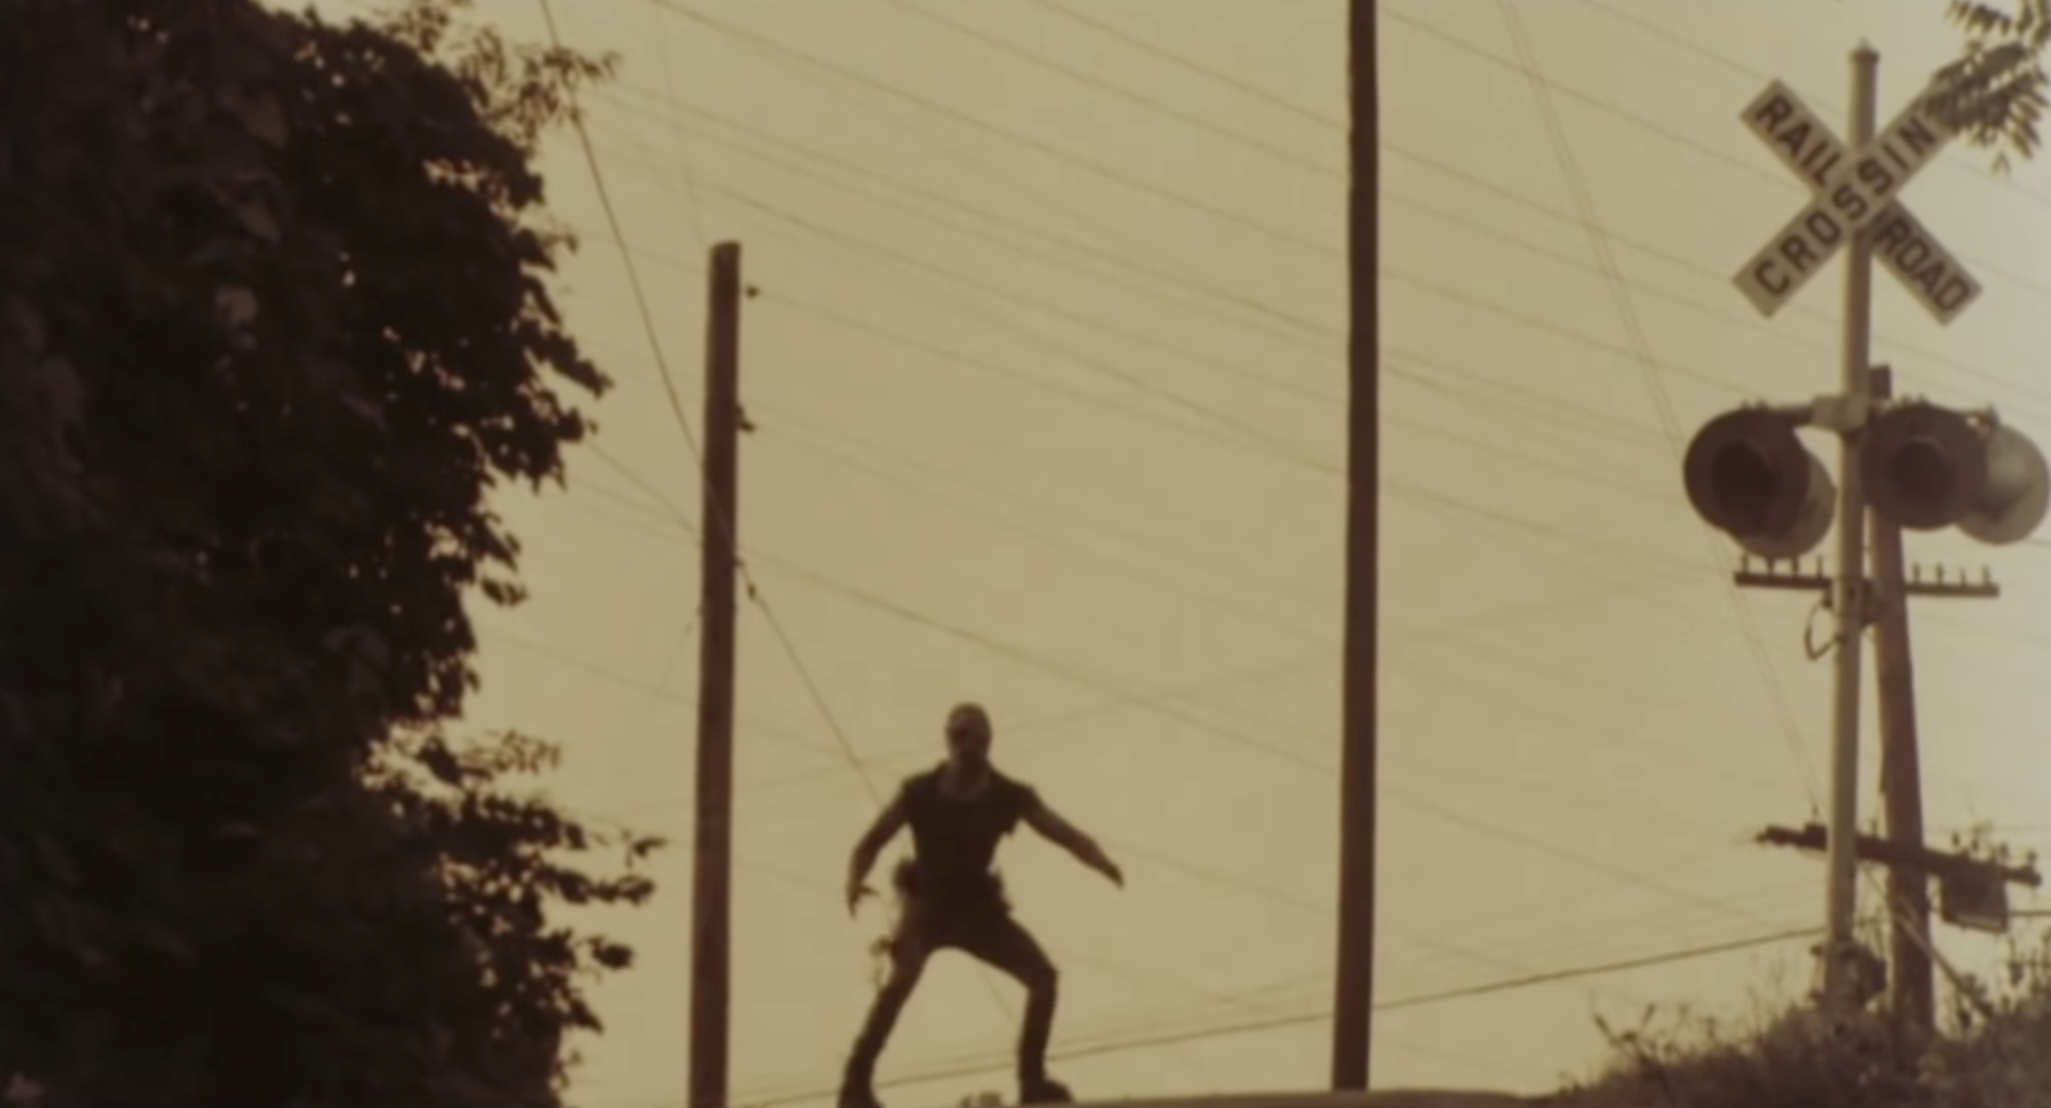 The Toxic Avenger’s silhouette stands menacingly on the street as the sun sets.